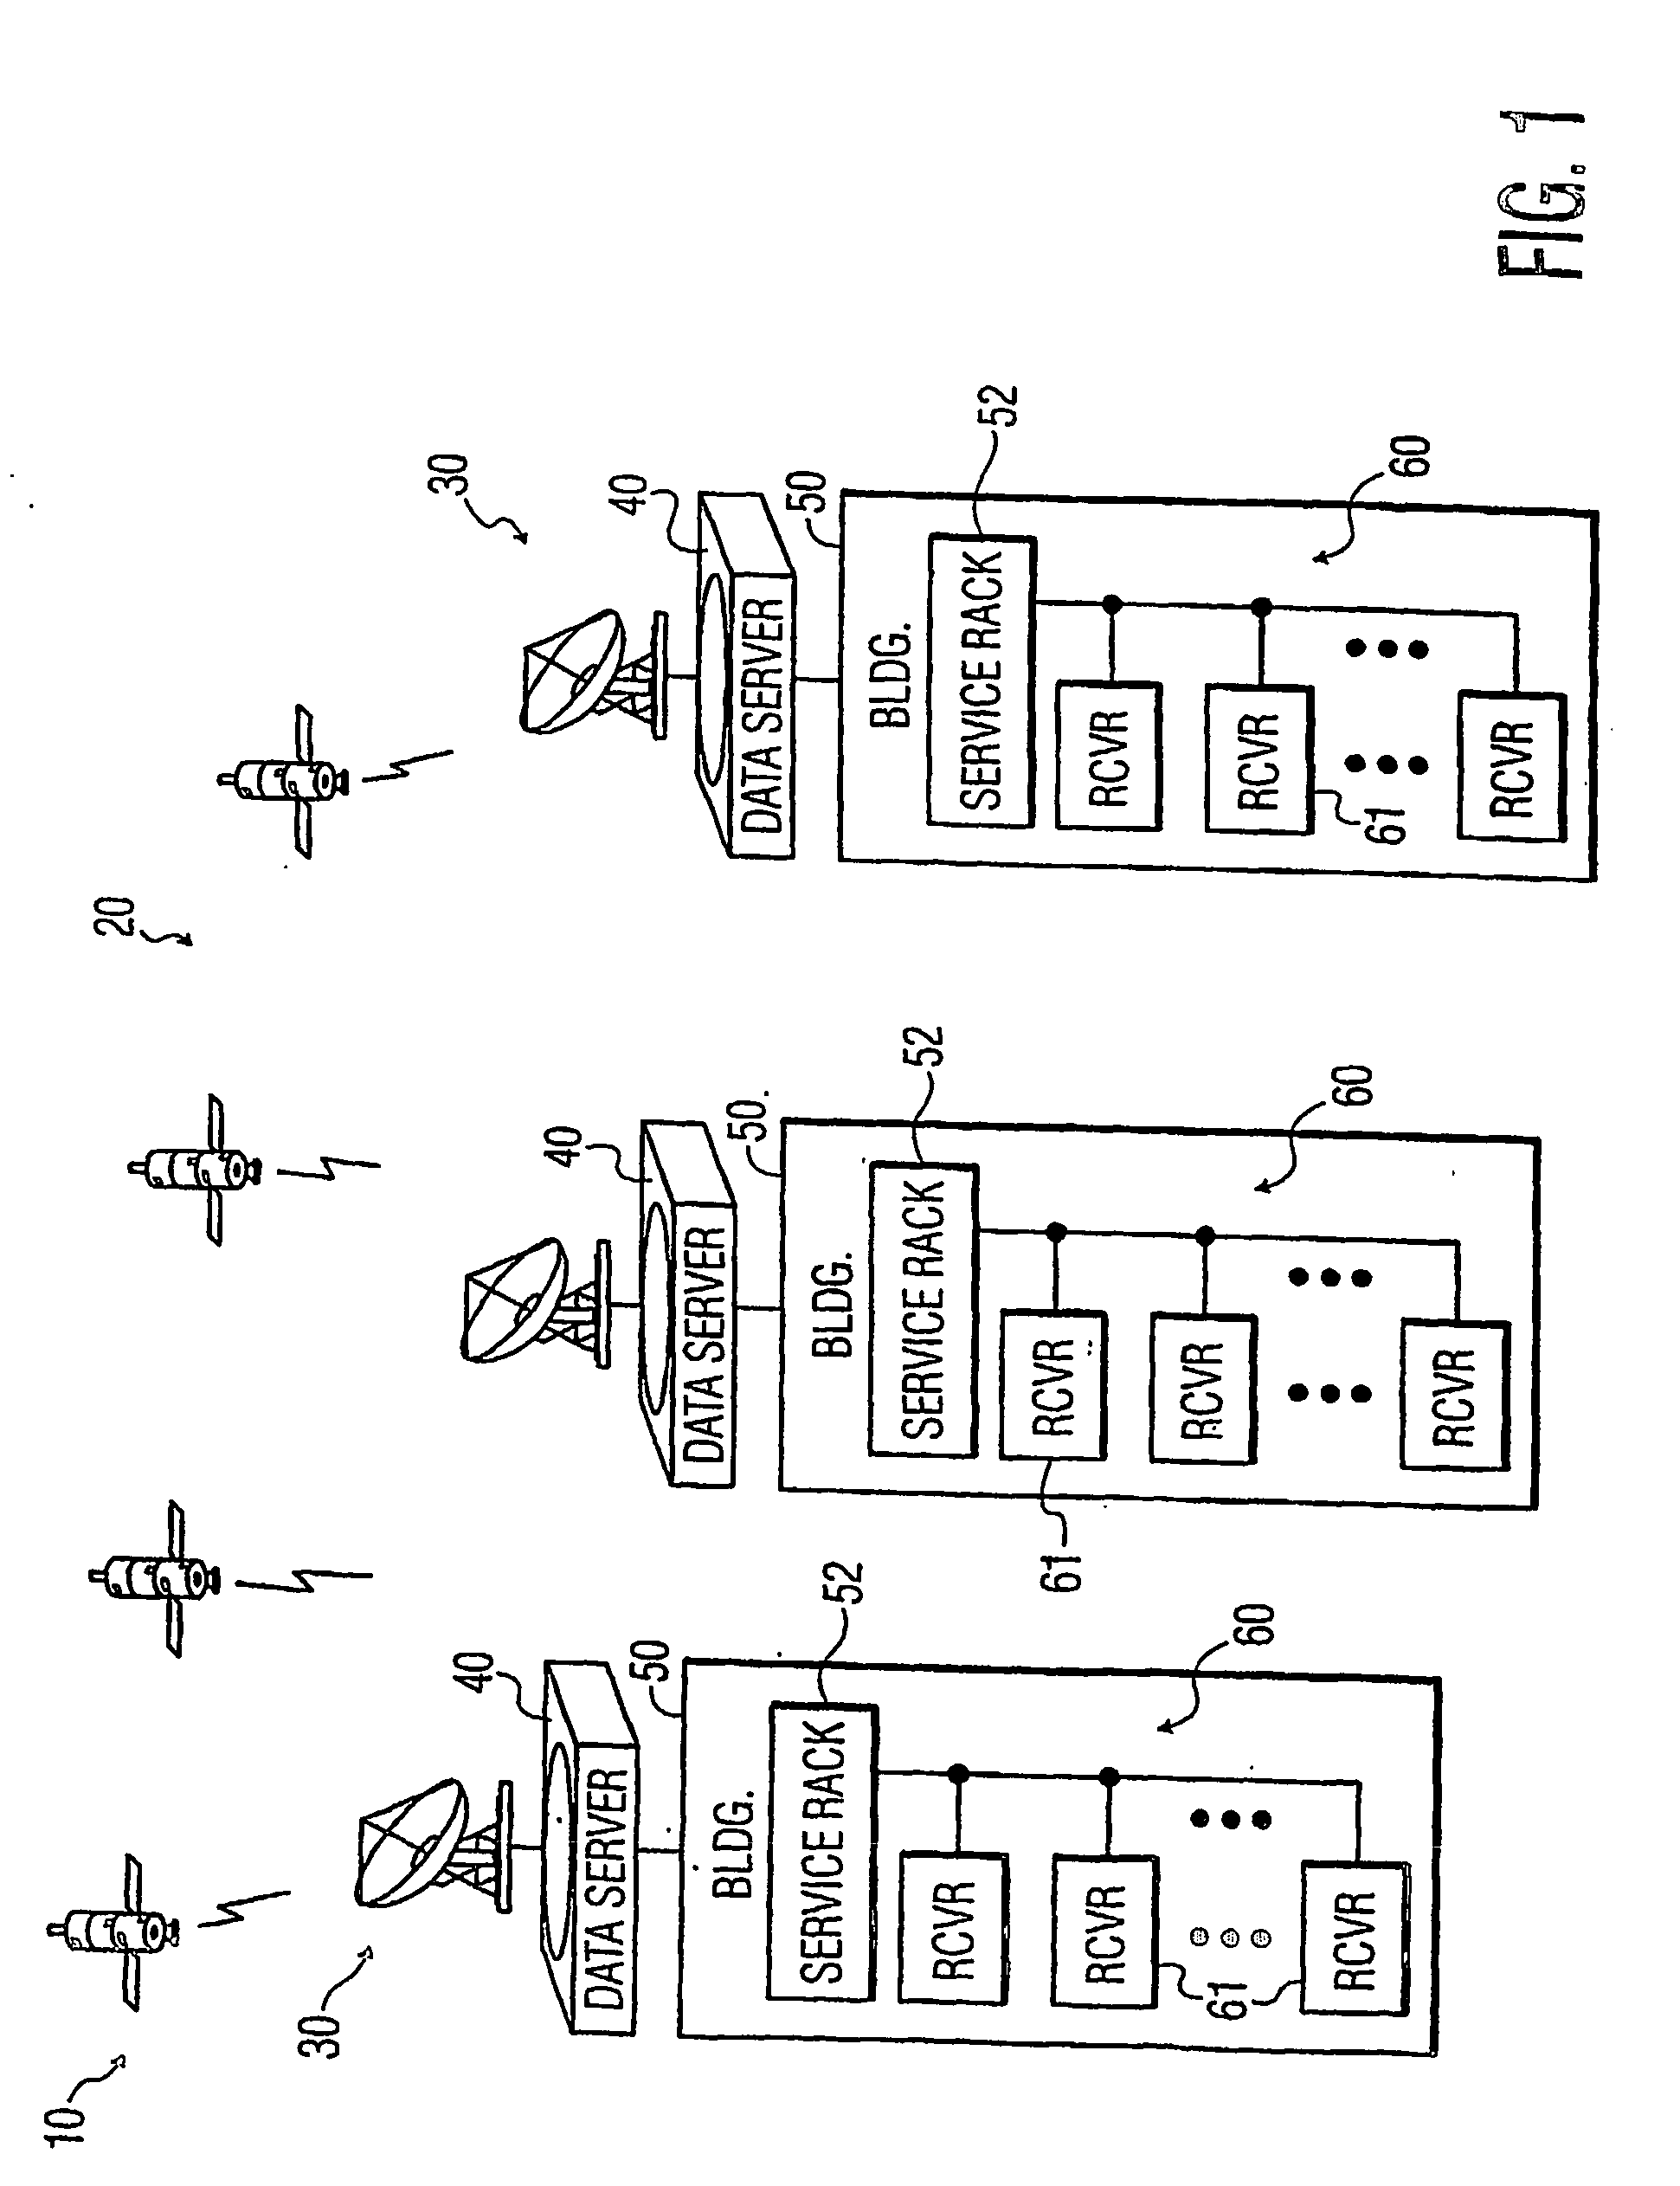 System and method for utilizing multicast ip and ethernet to locate and distribute a satellite signal